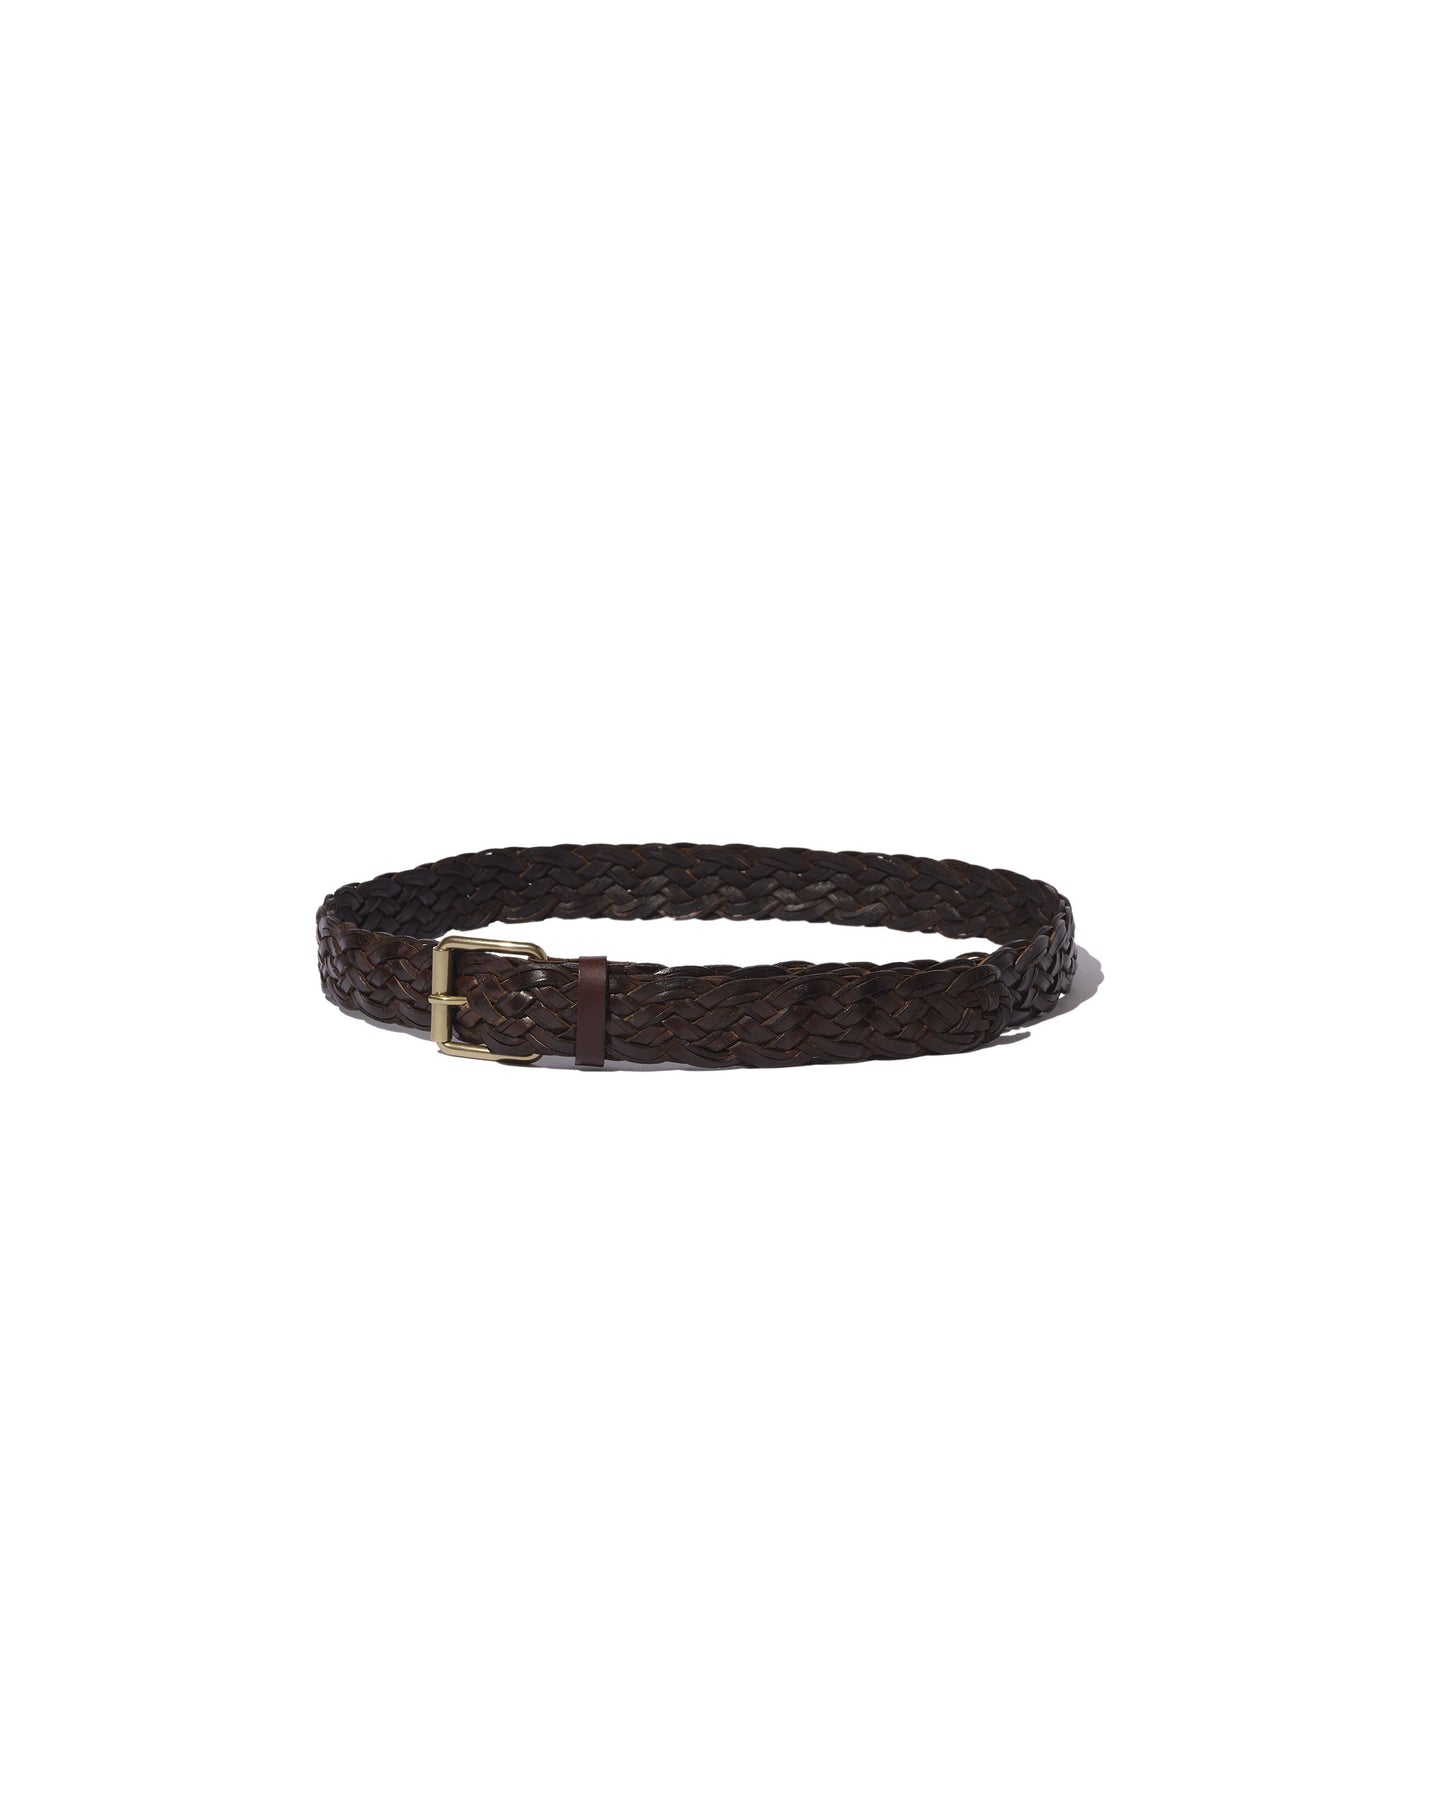 Brown braided vegetable tanned leather belt